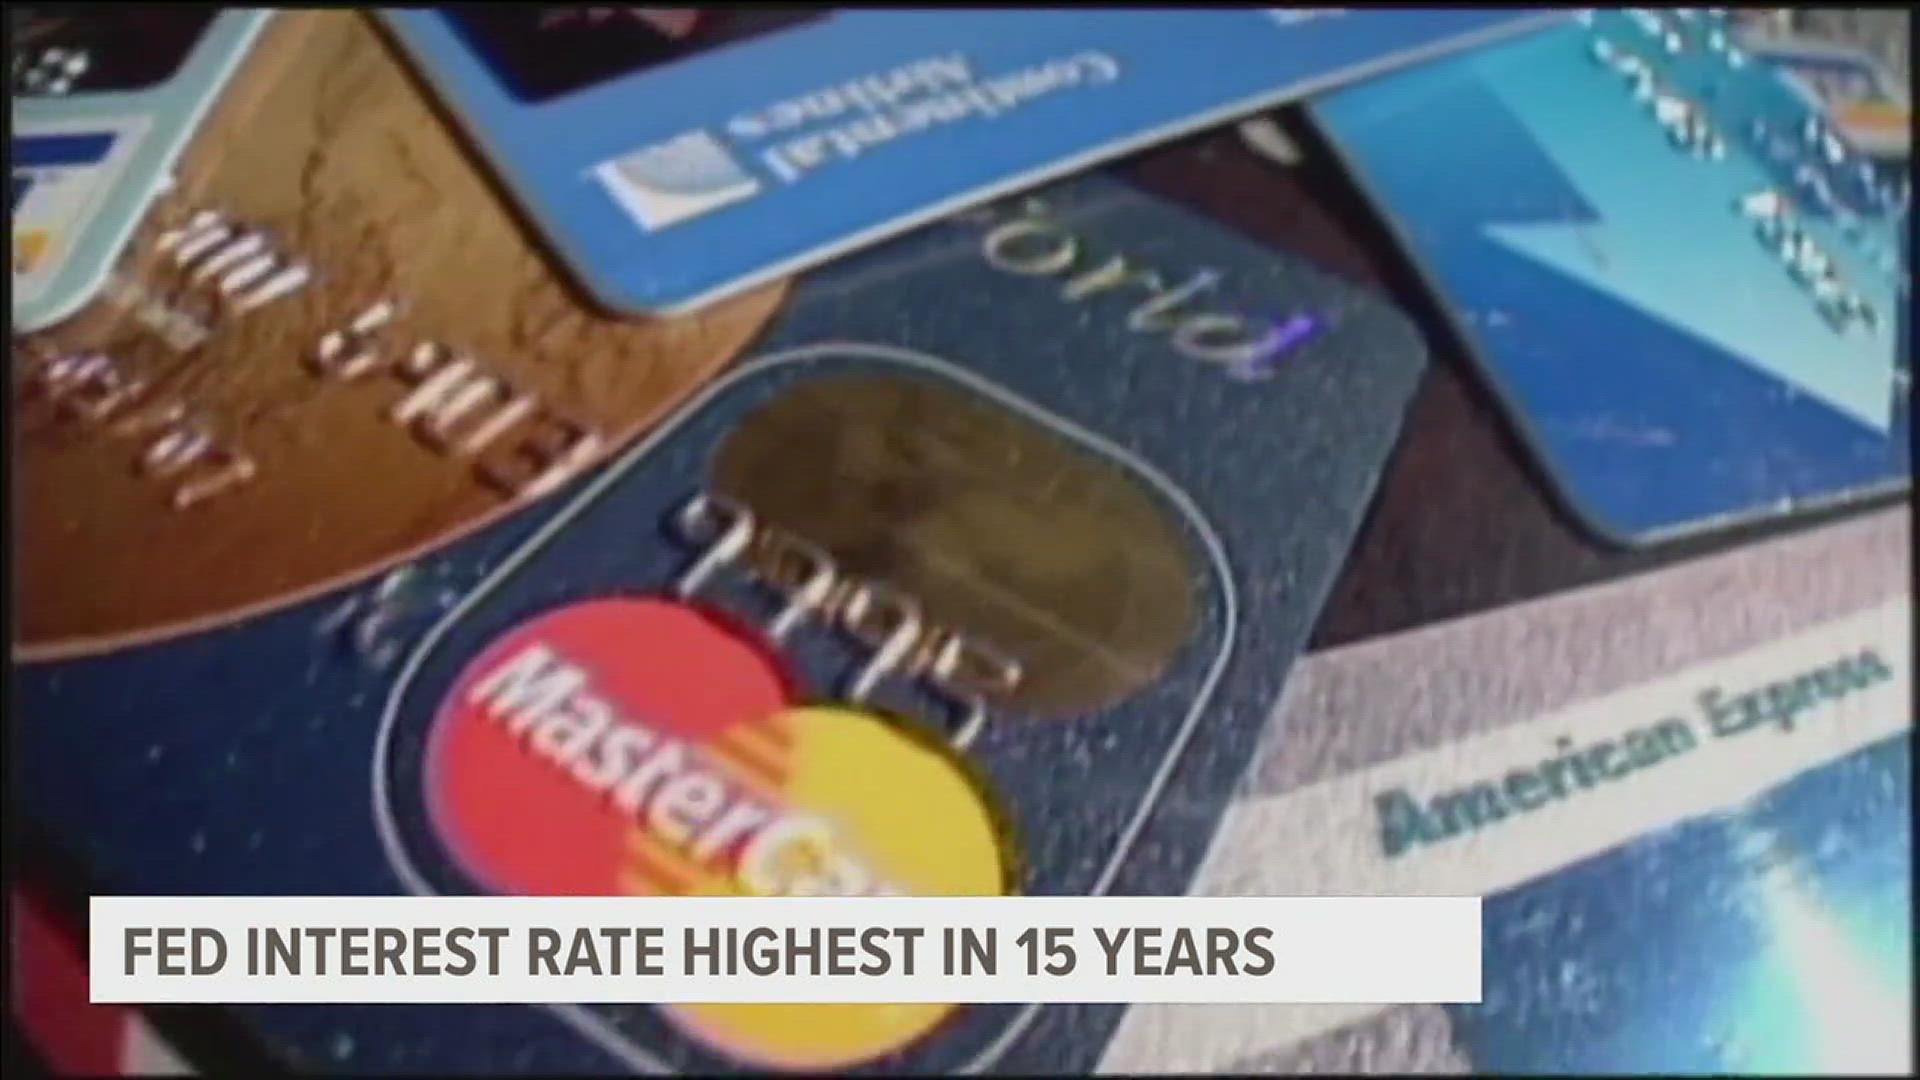 The rate is at the highest it has been in 15 years.